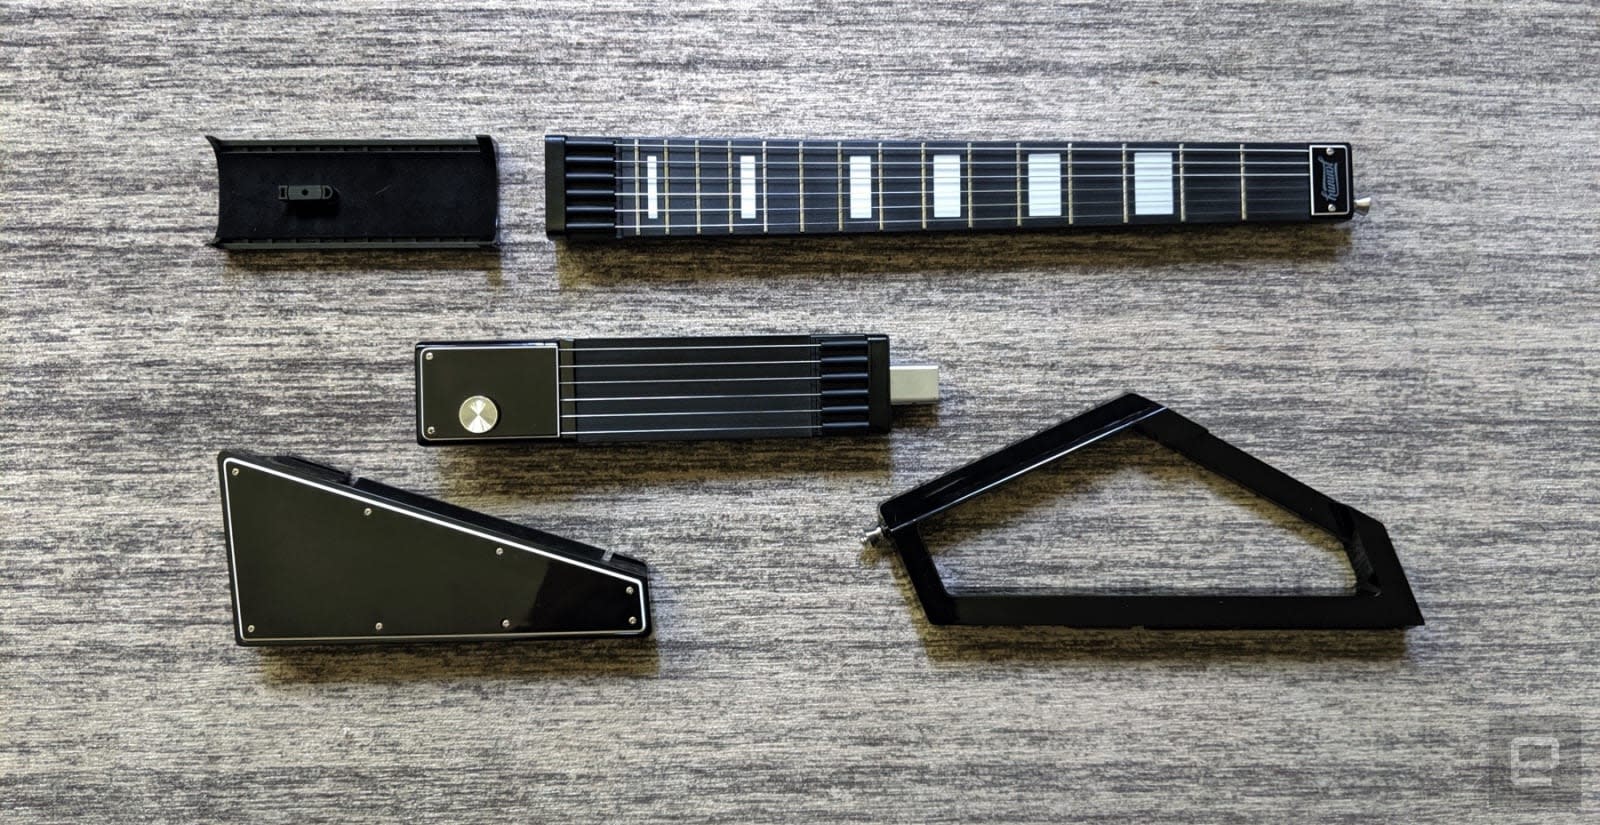 Jammy’s digital guitar is a futuristic idea let down by today's tech